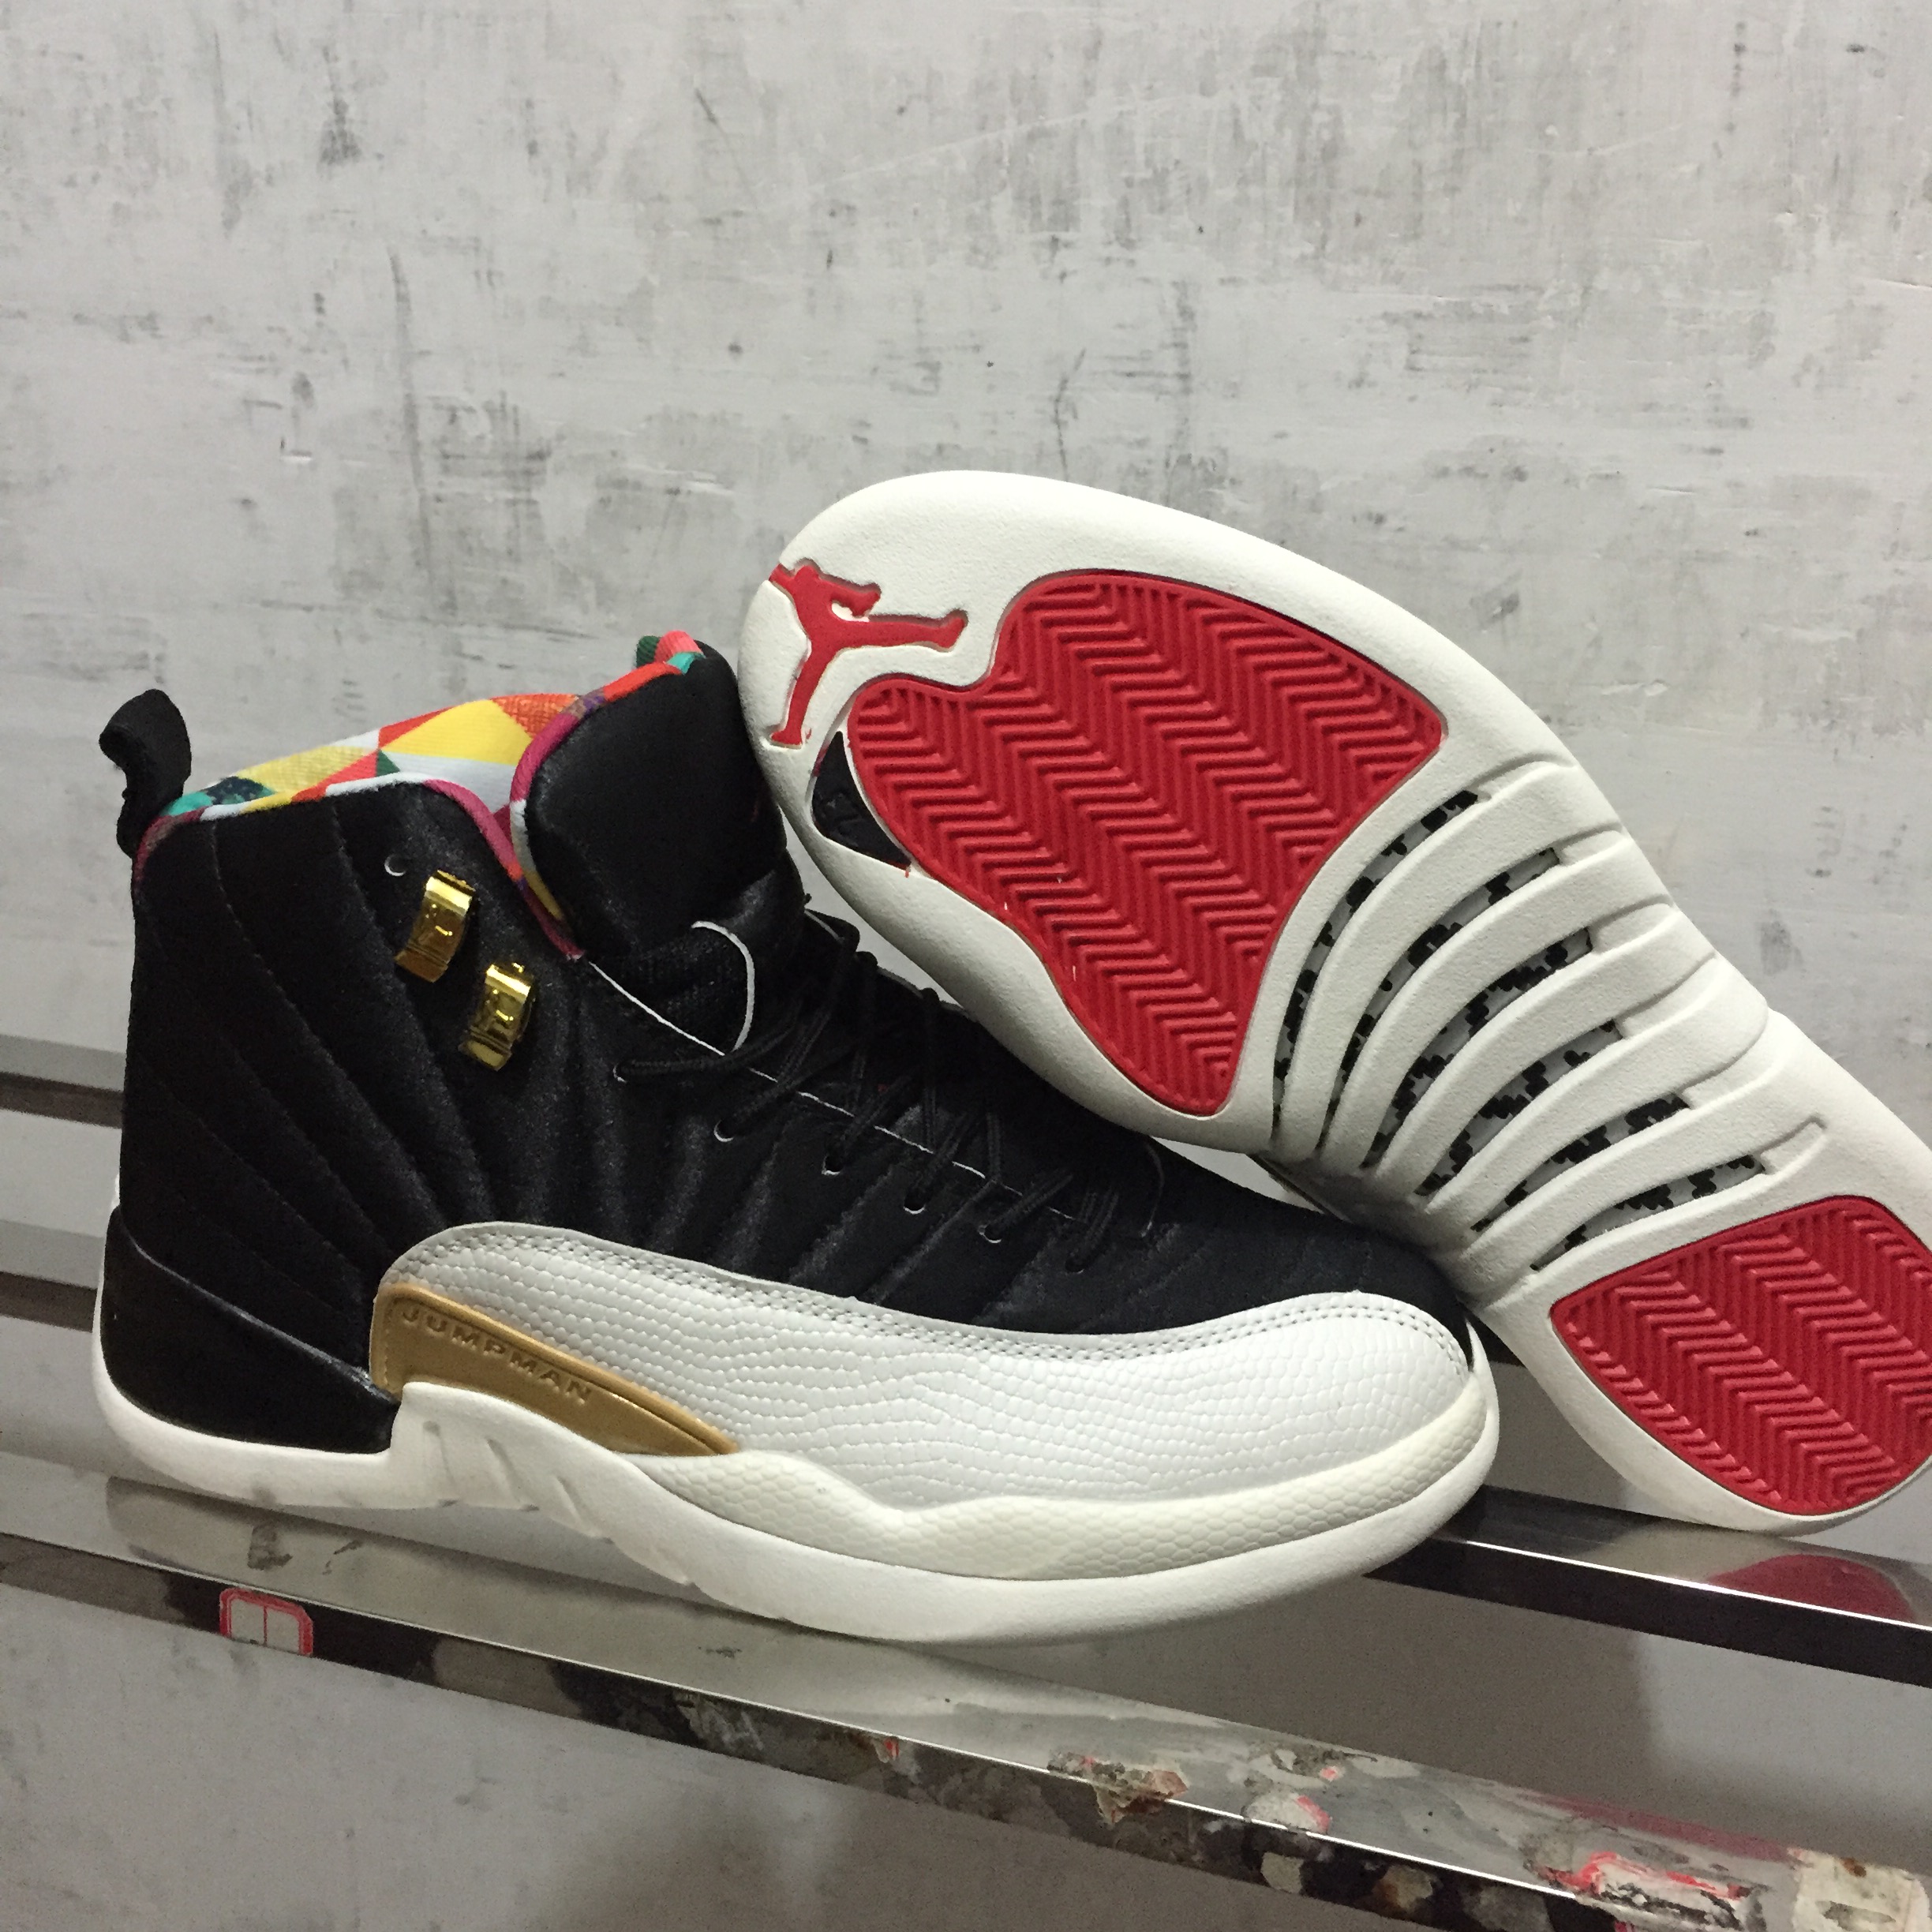 jordan 12 red and white gold